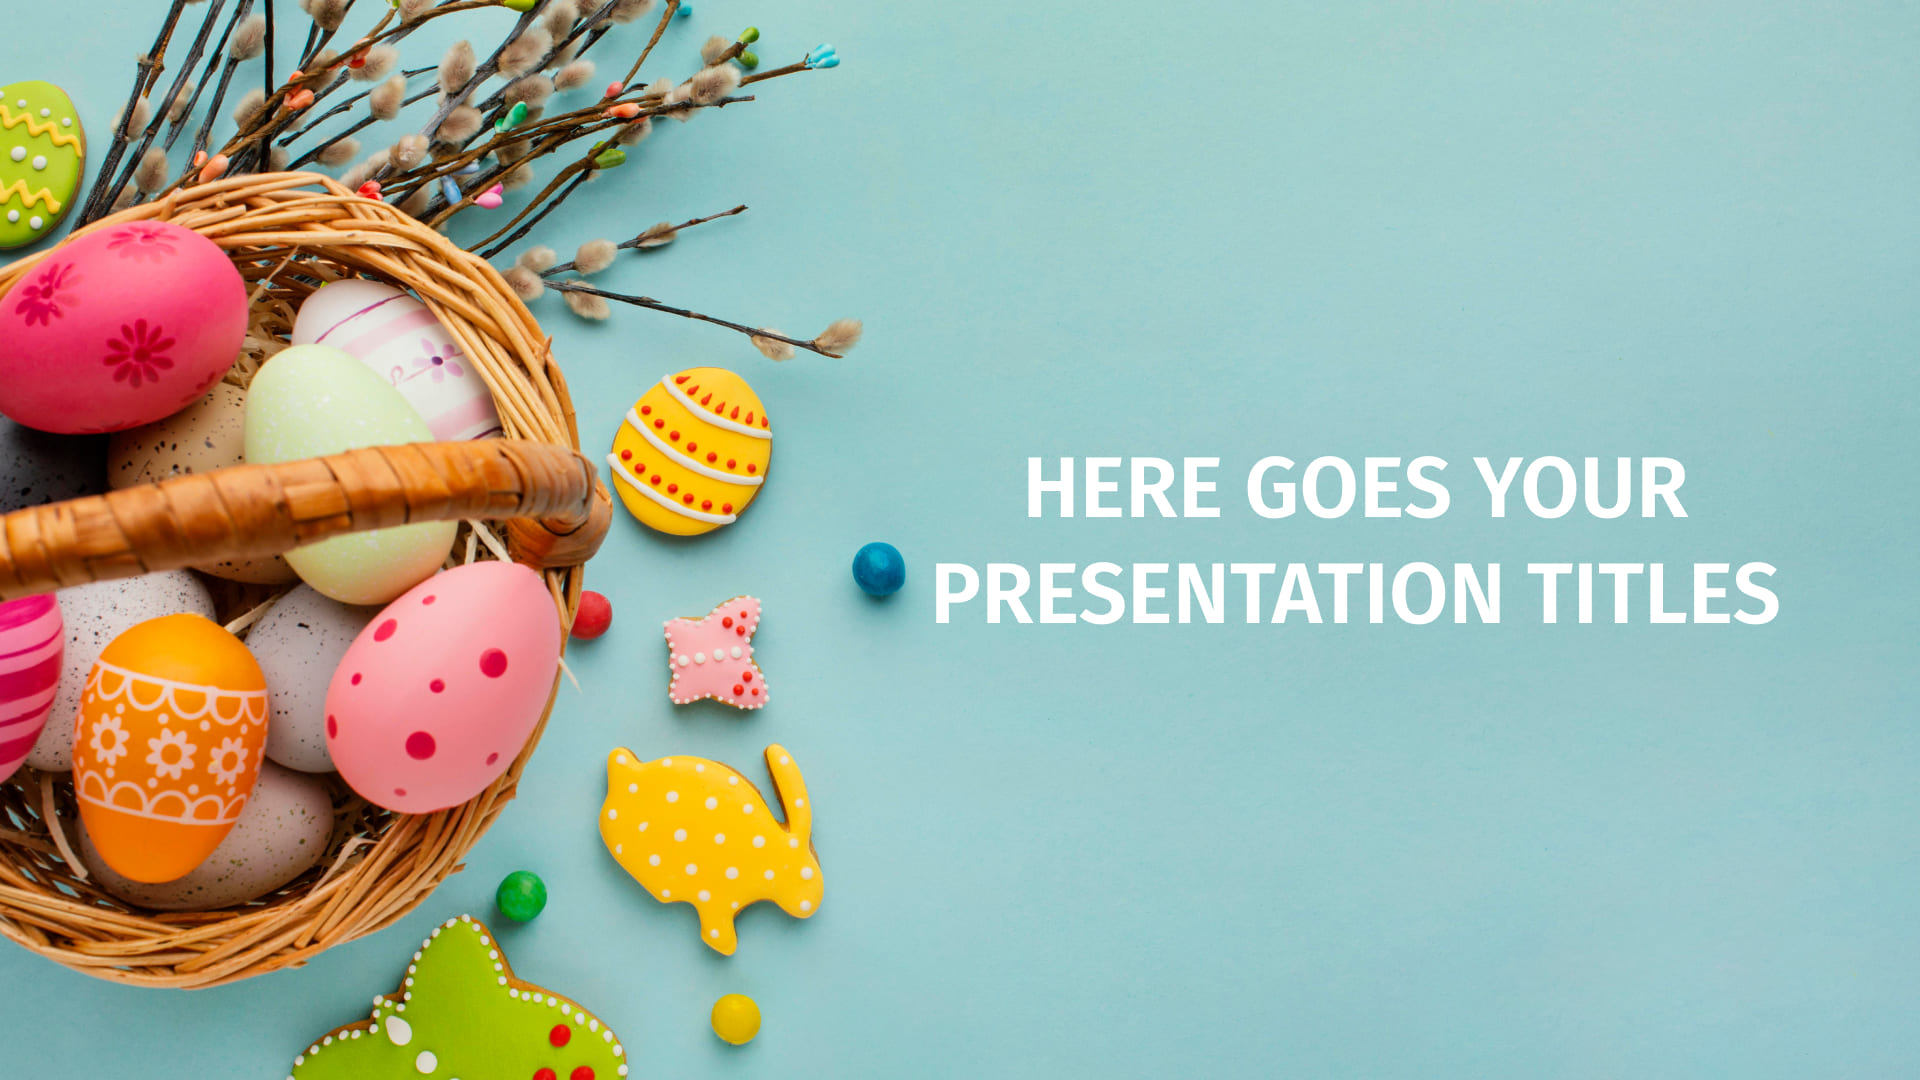 easter powerpoint templates